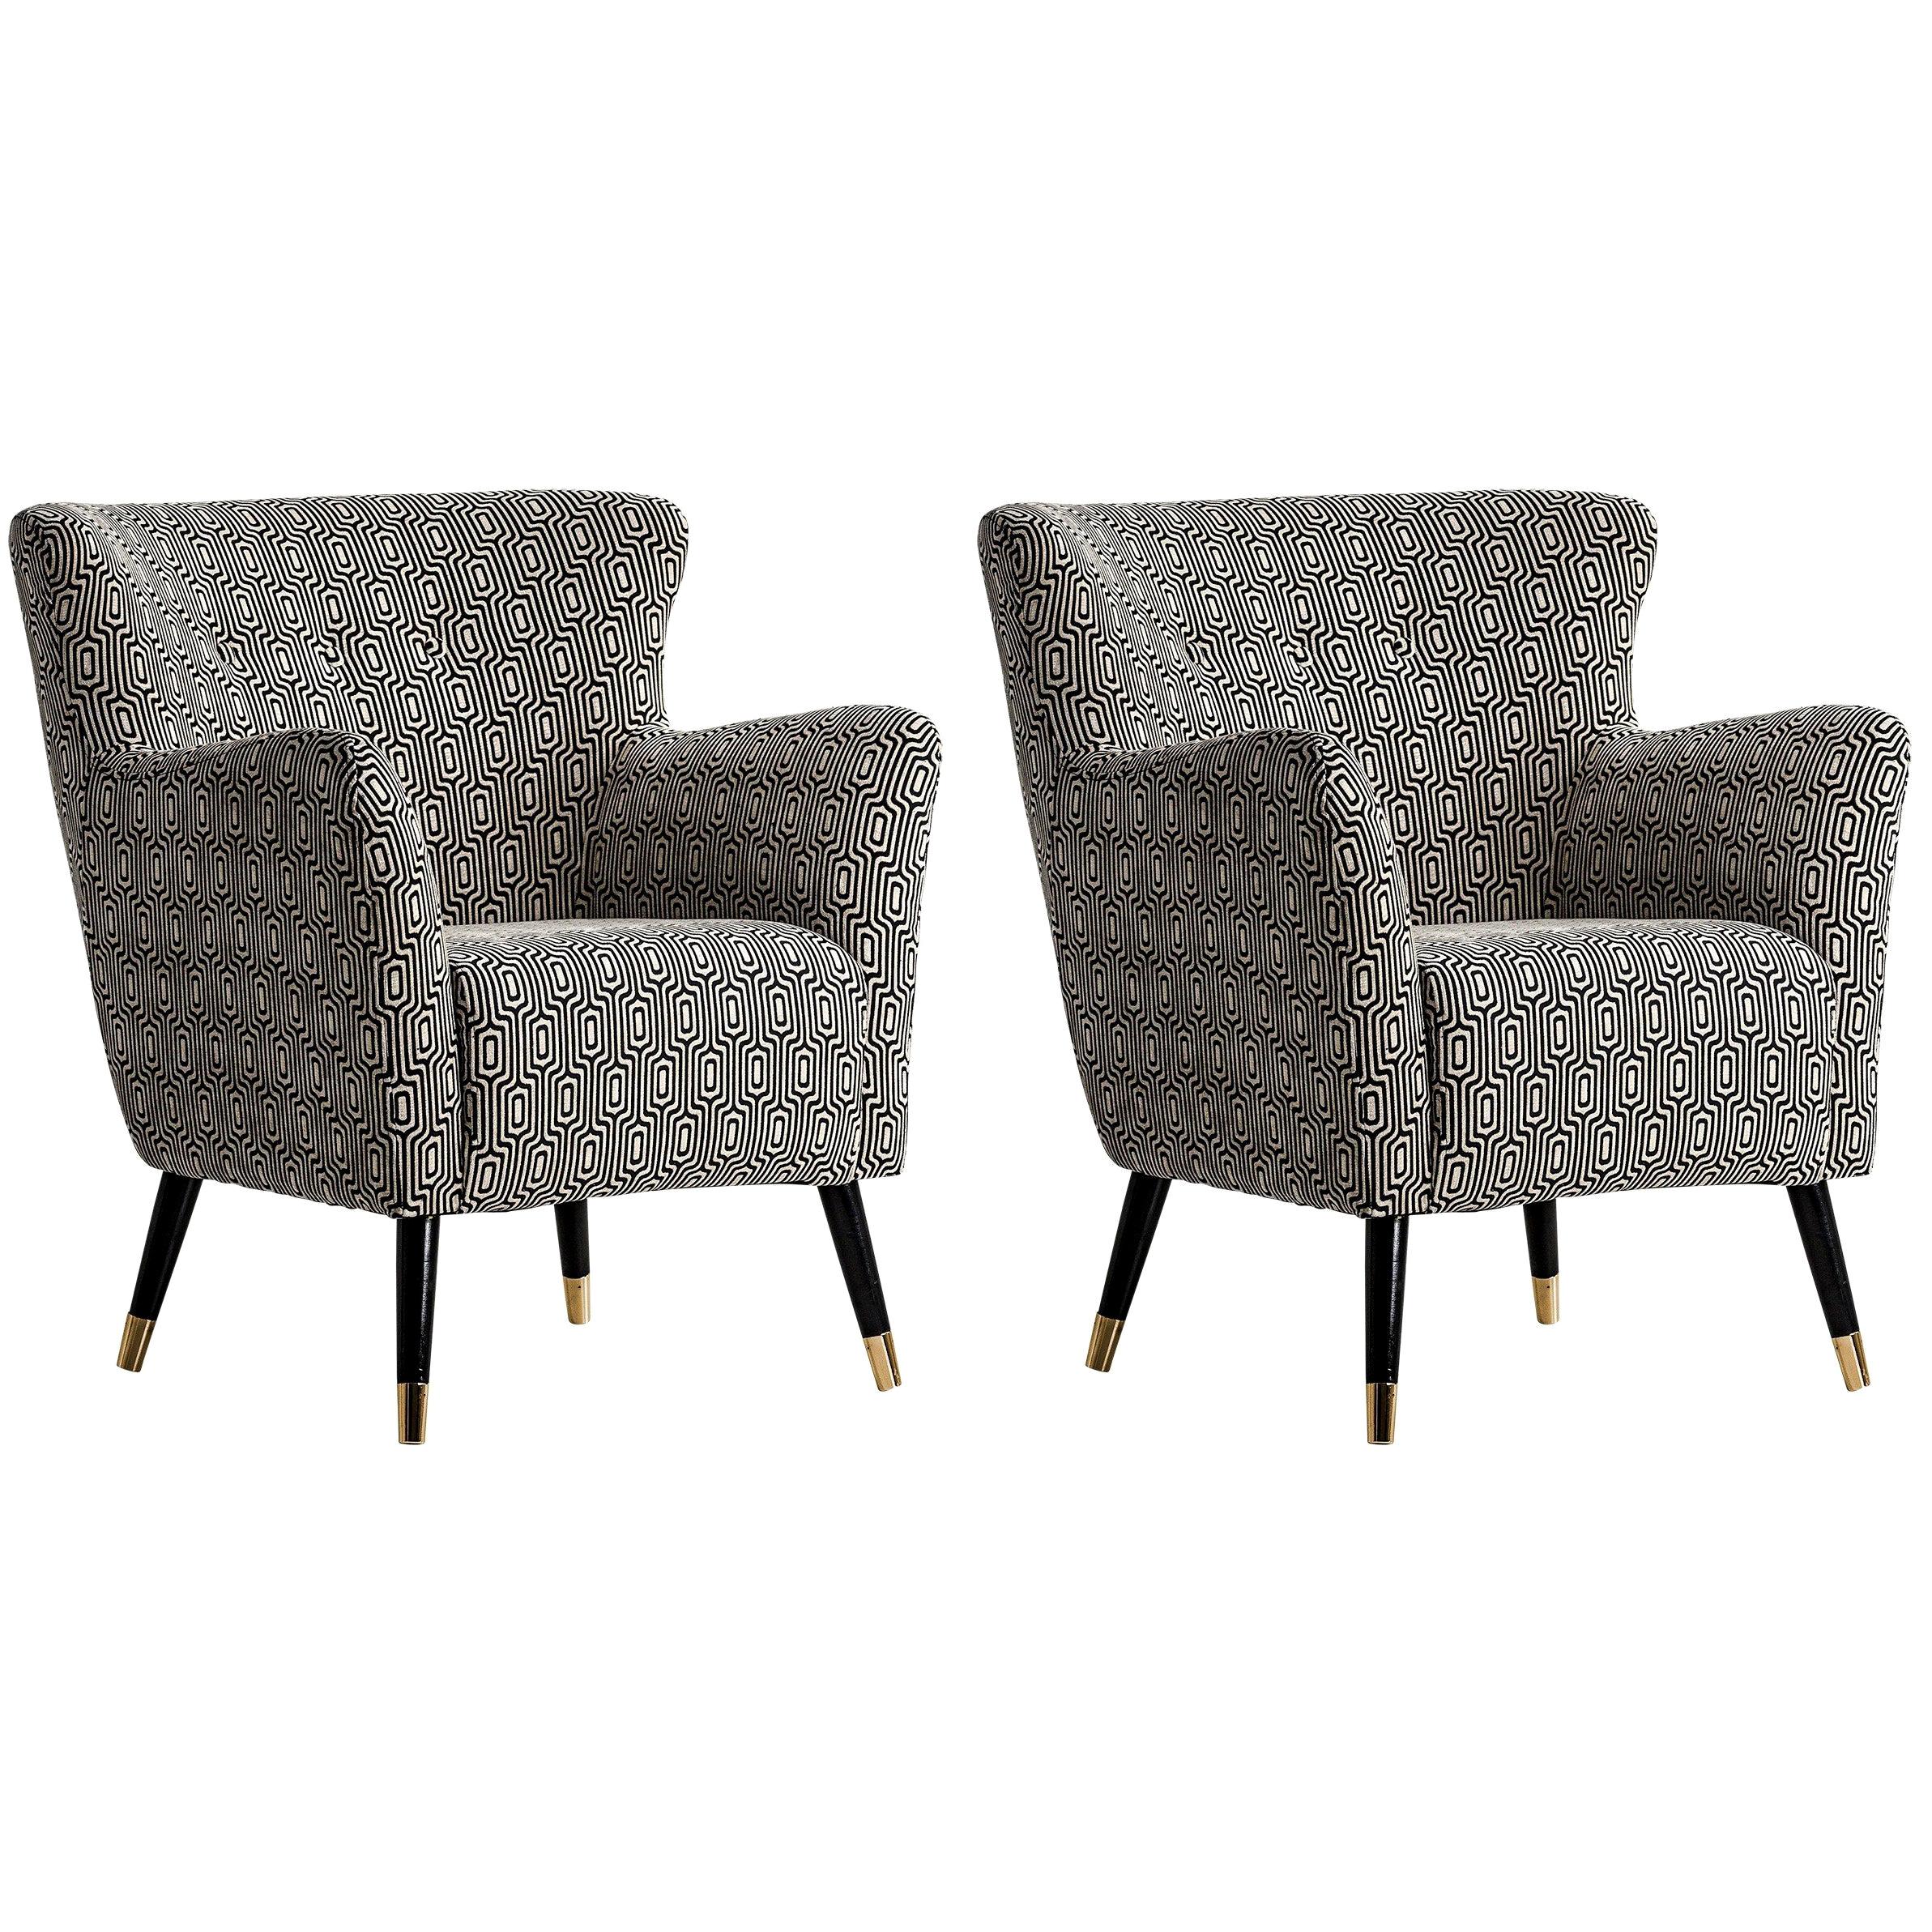 Italian Design Style Black and White Fabric Pair of Armchairs